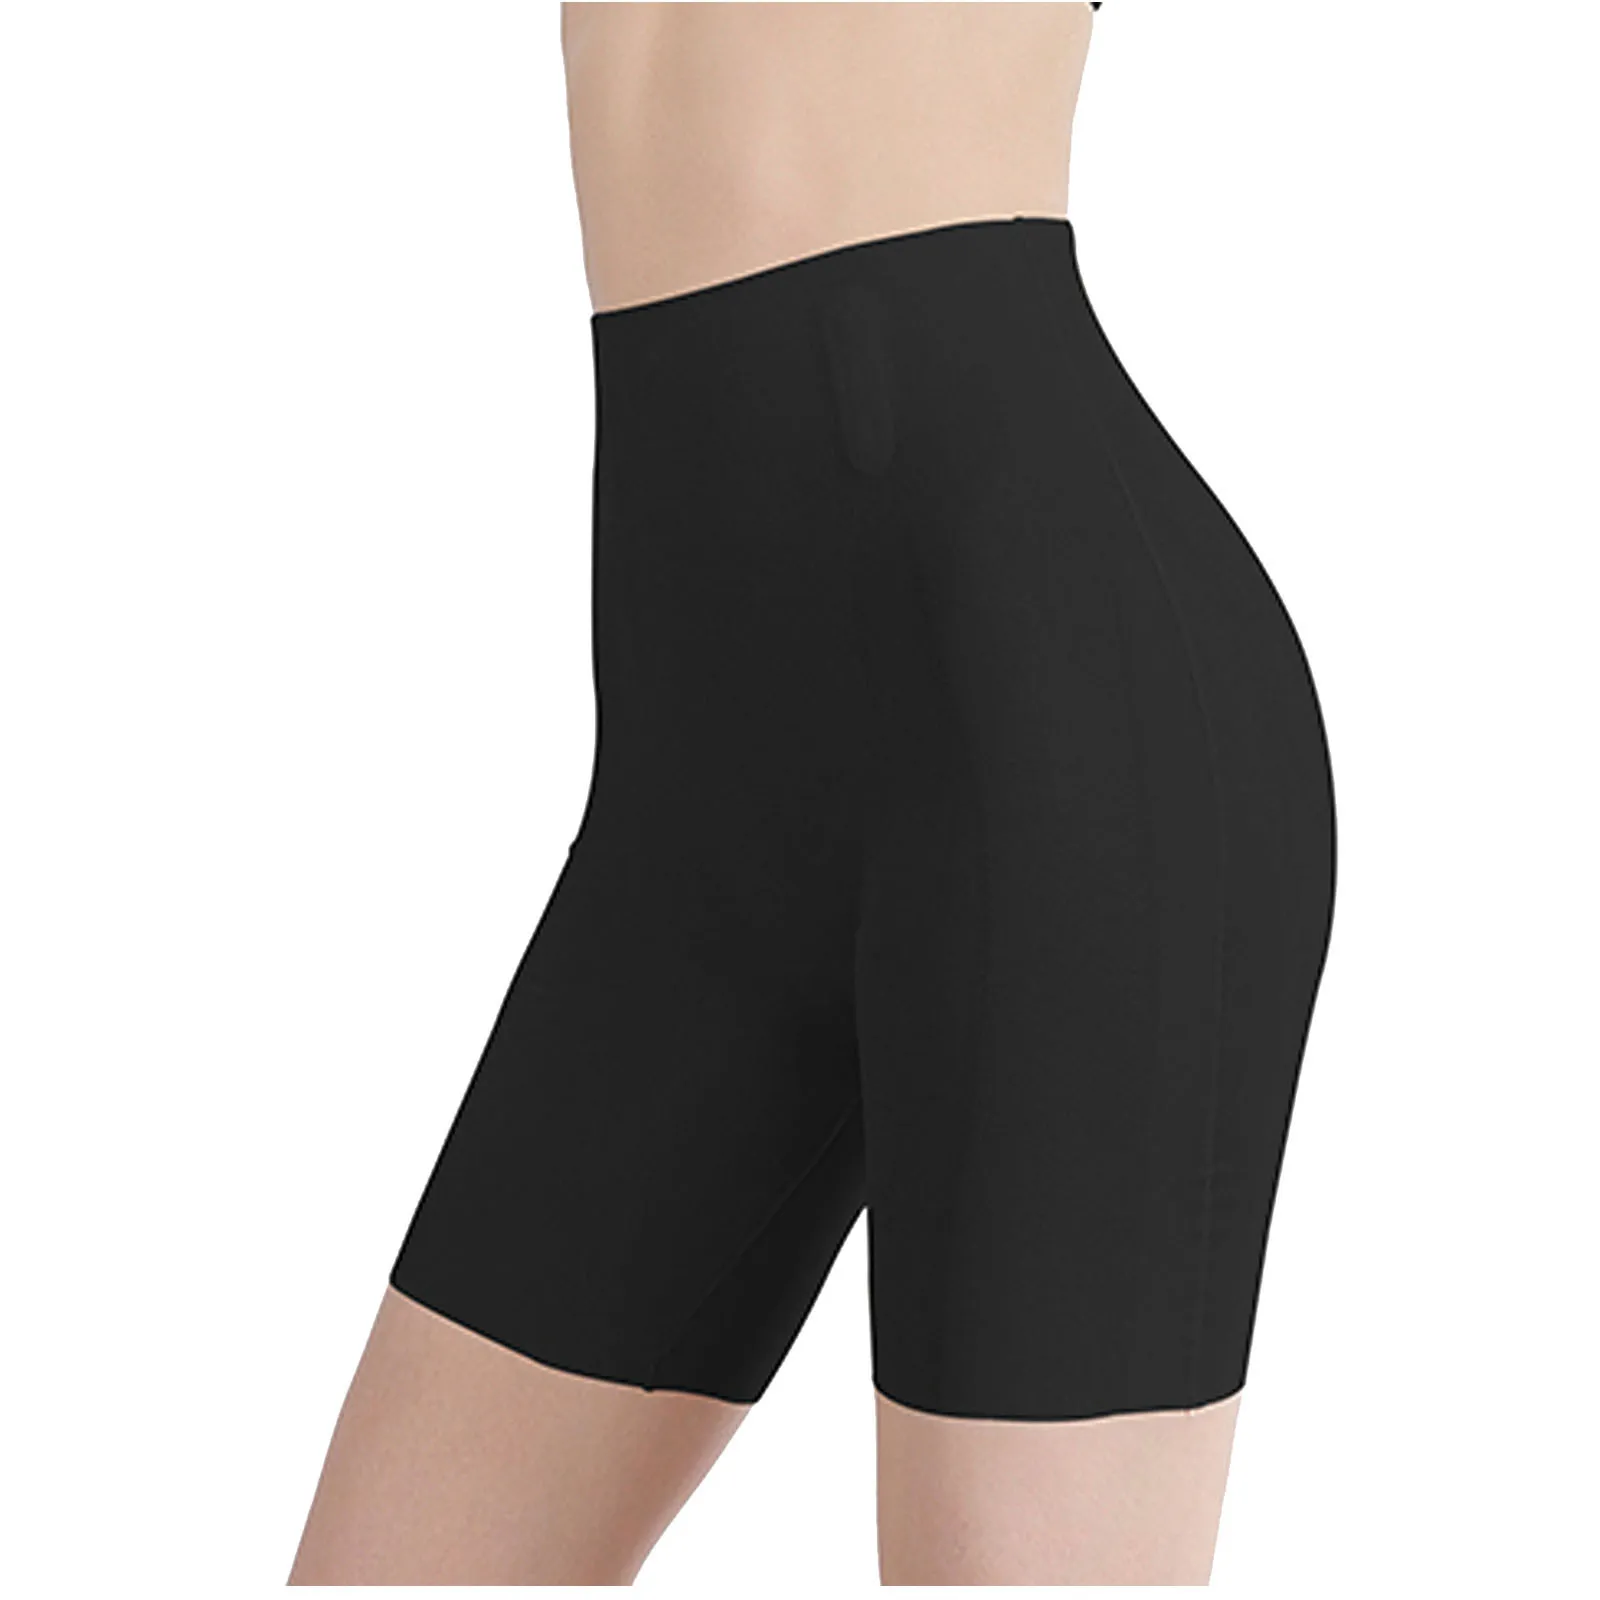 

Solid High Waist Nice Buttocks Peach Buttocks Belly-up Shorts Slim Pants Body Shaper Shorts Shapewear Control Thigh Slimming